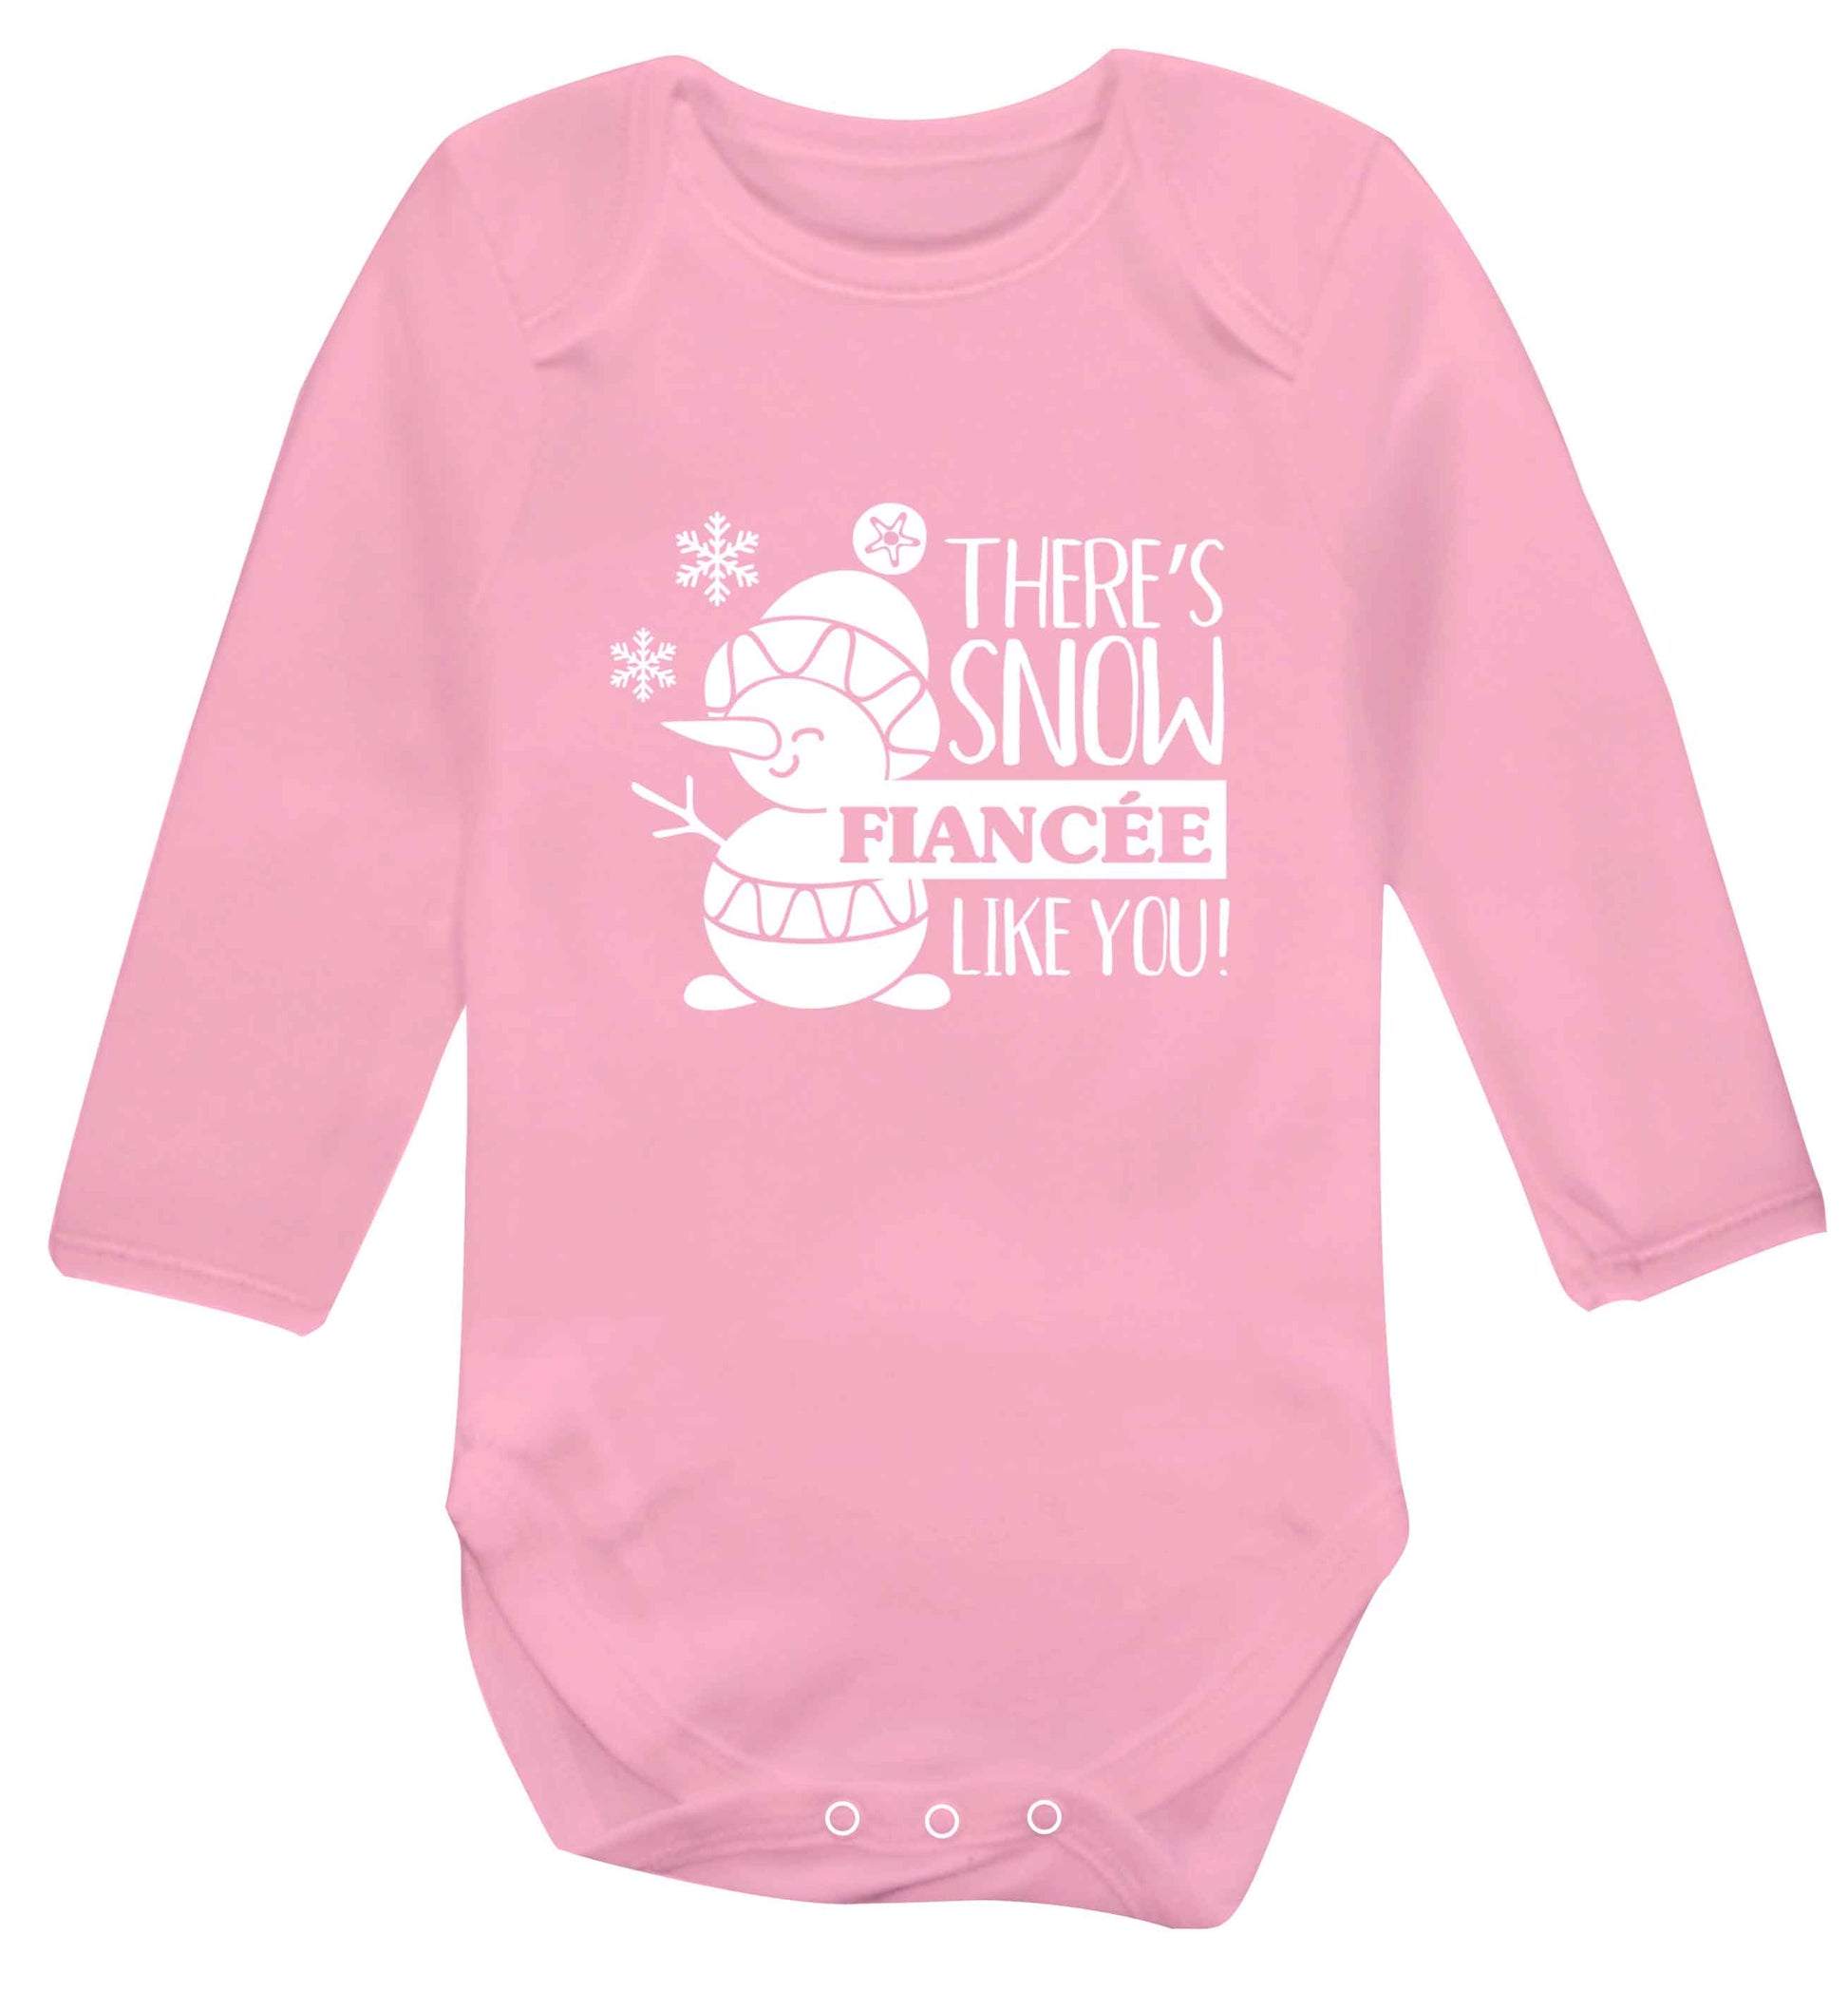 There's snow fiancee like you baby vest long sleeved pale pink 6-12 months